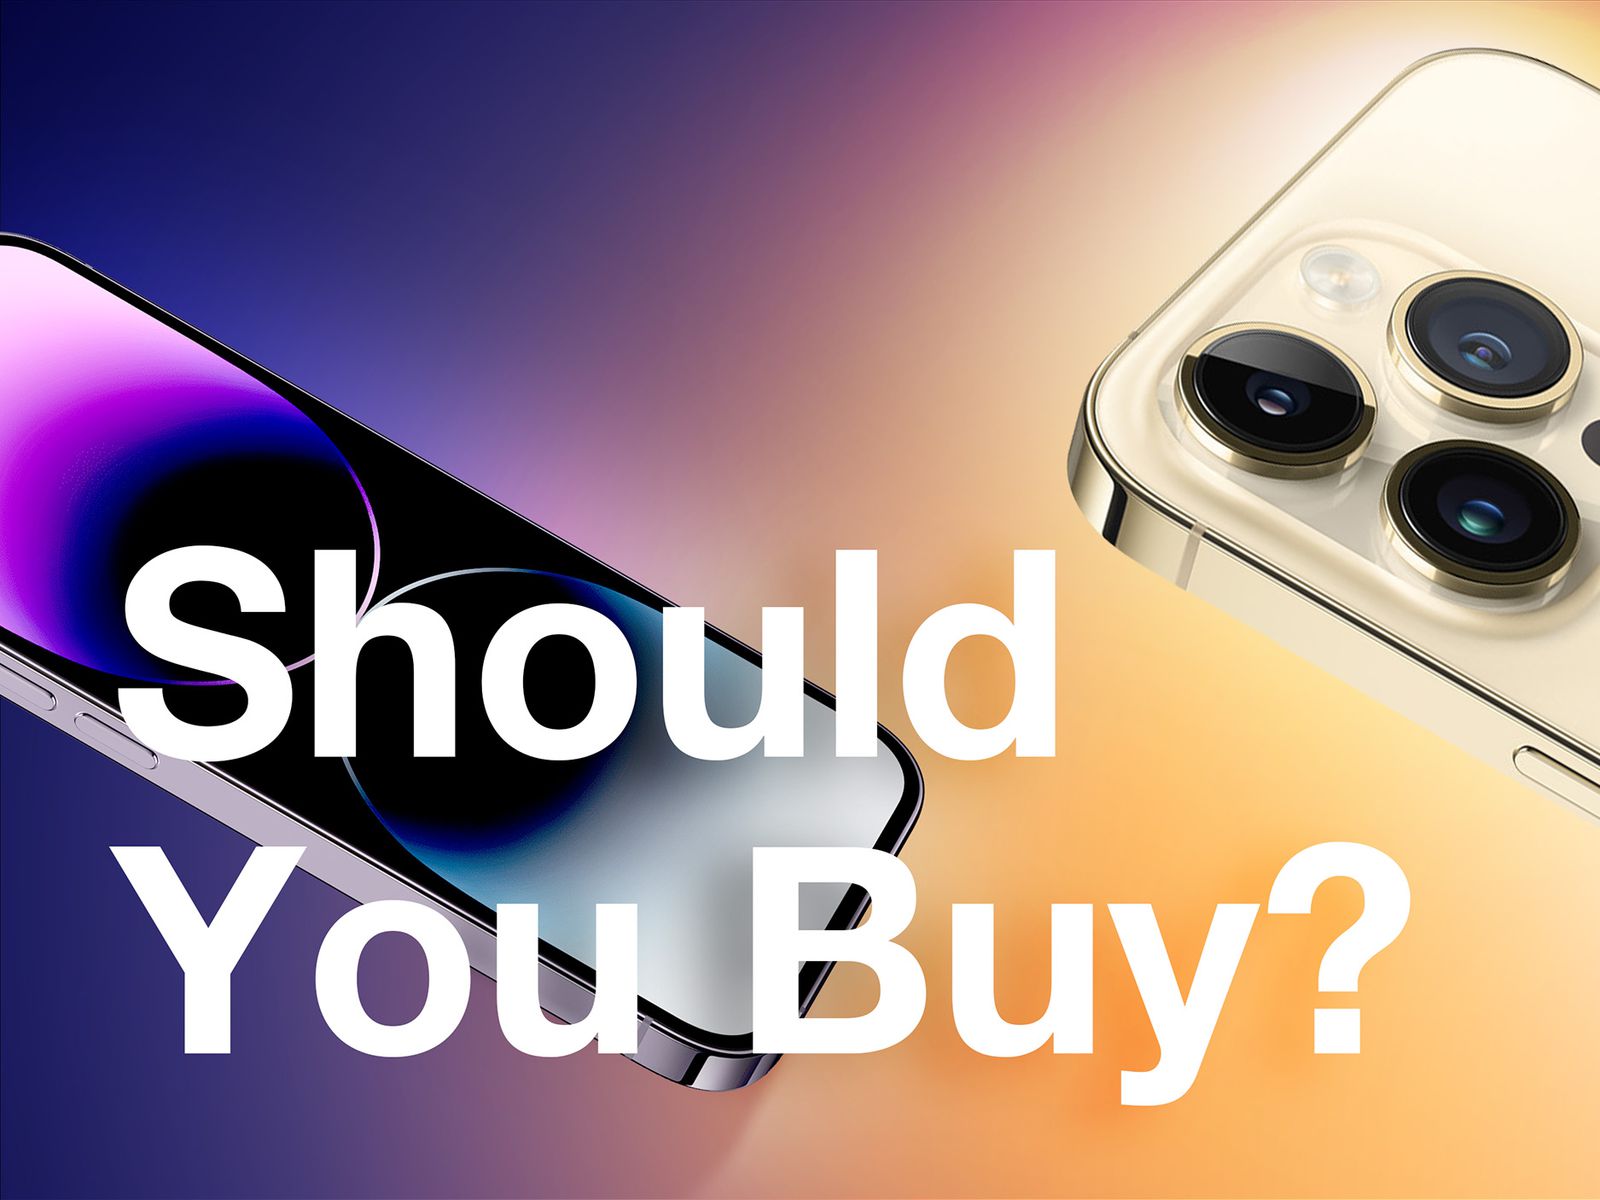 iPhone 14 Pro: Should You Buy? Features, Advice, Deals and More